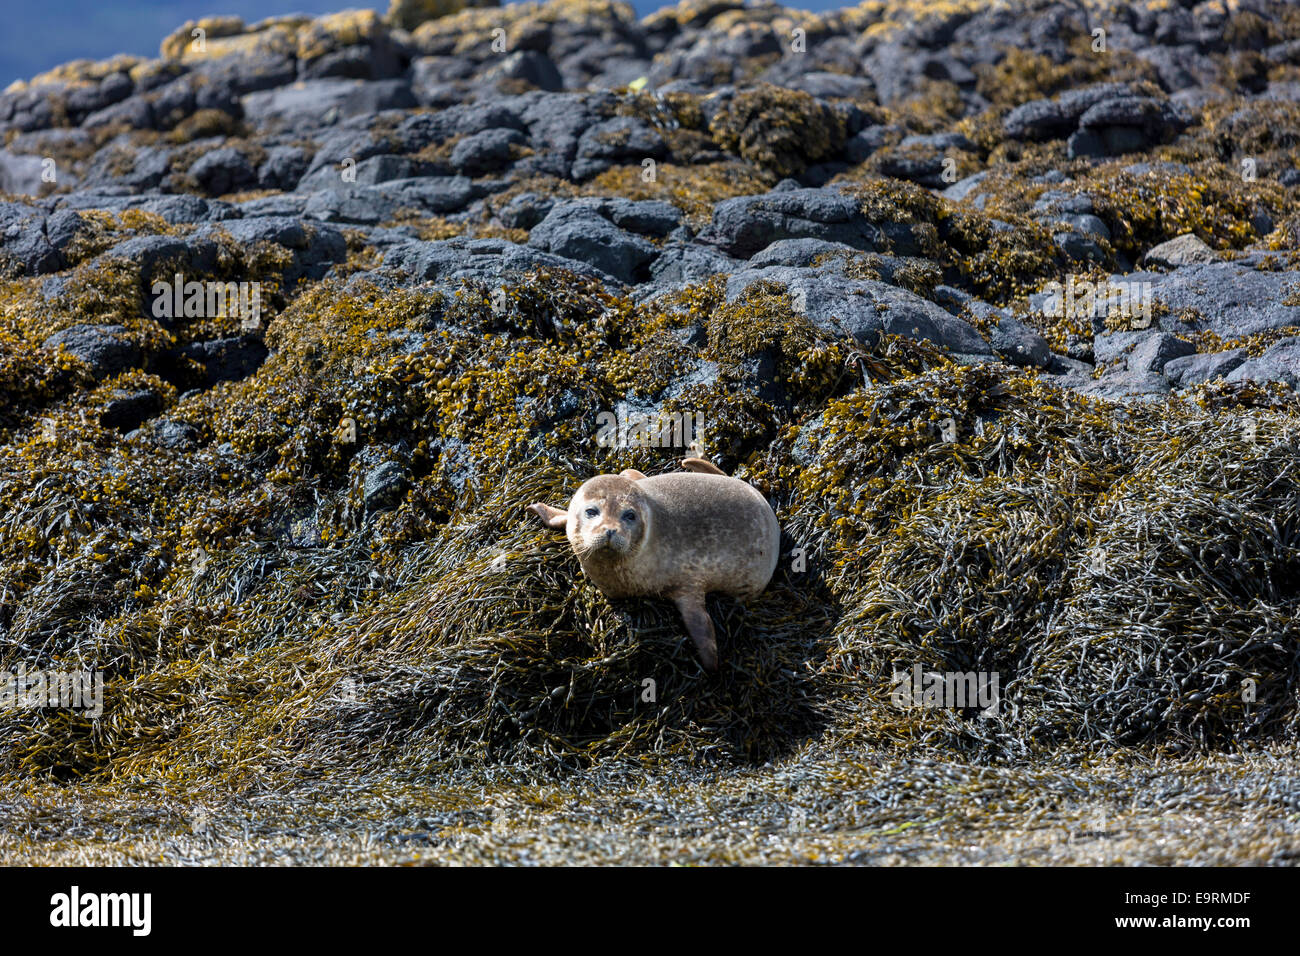 Common Seal or Harbour Seal, Phoca vitulina, adult basking on rocks and seaweed by Dunvegan Loch, Isle of Skye, Western SCOTLAND Stock Photo